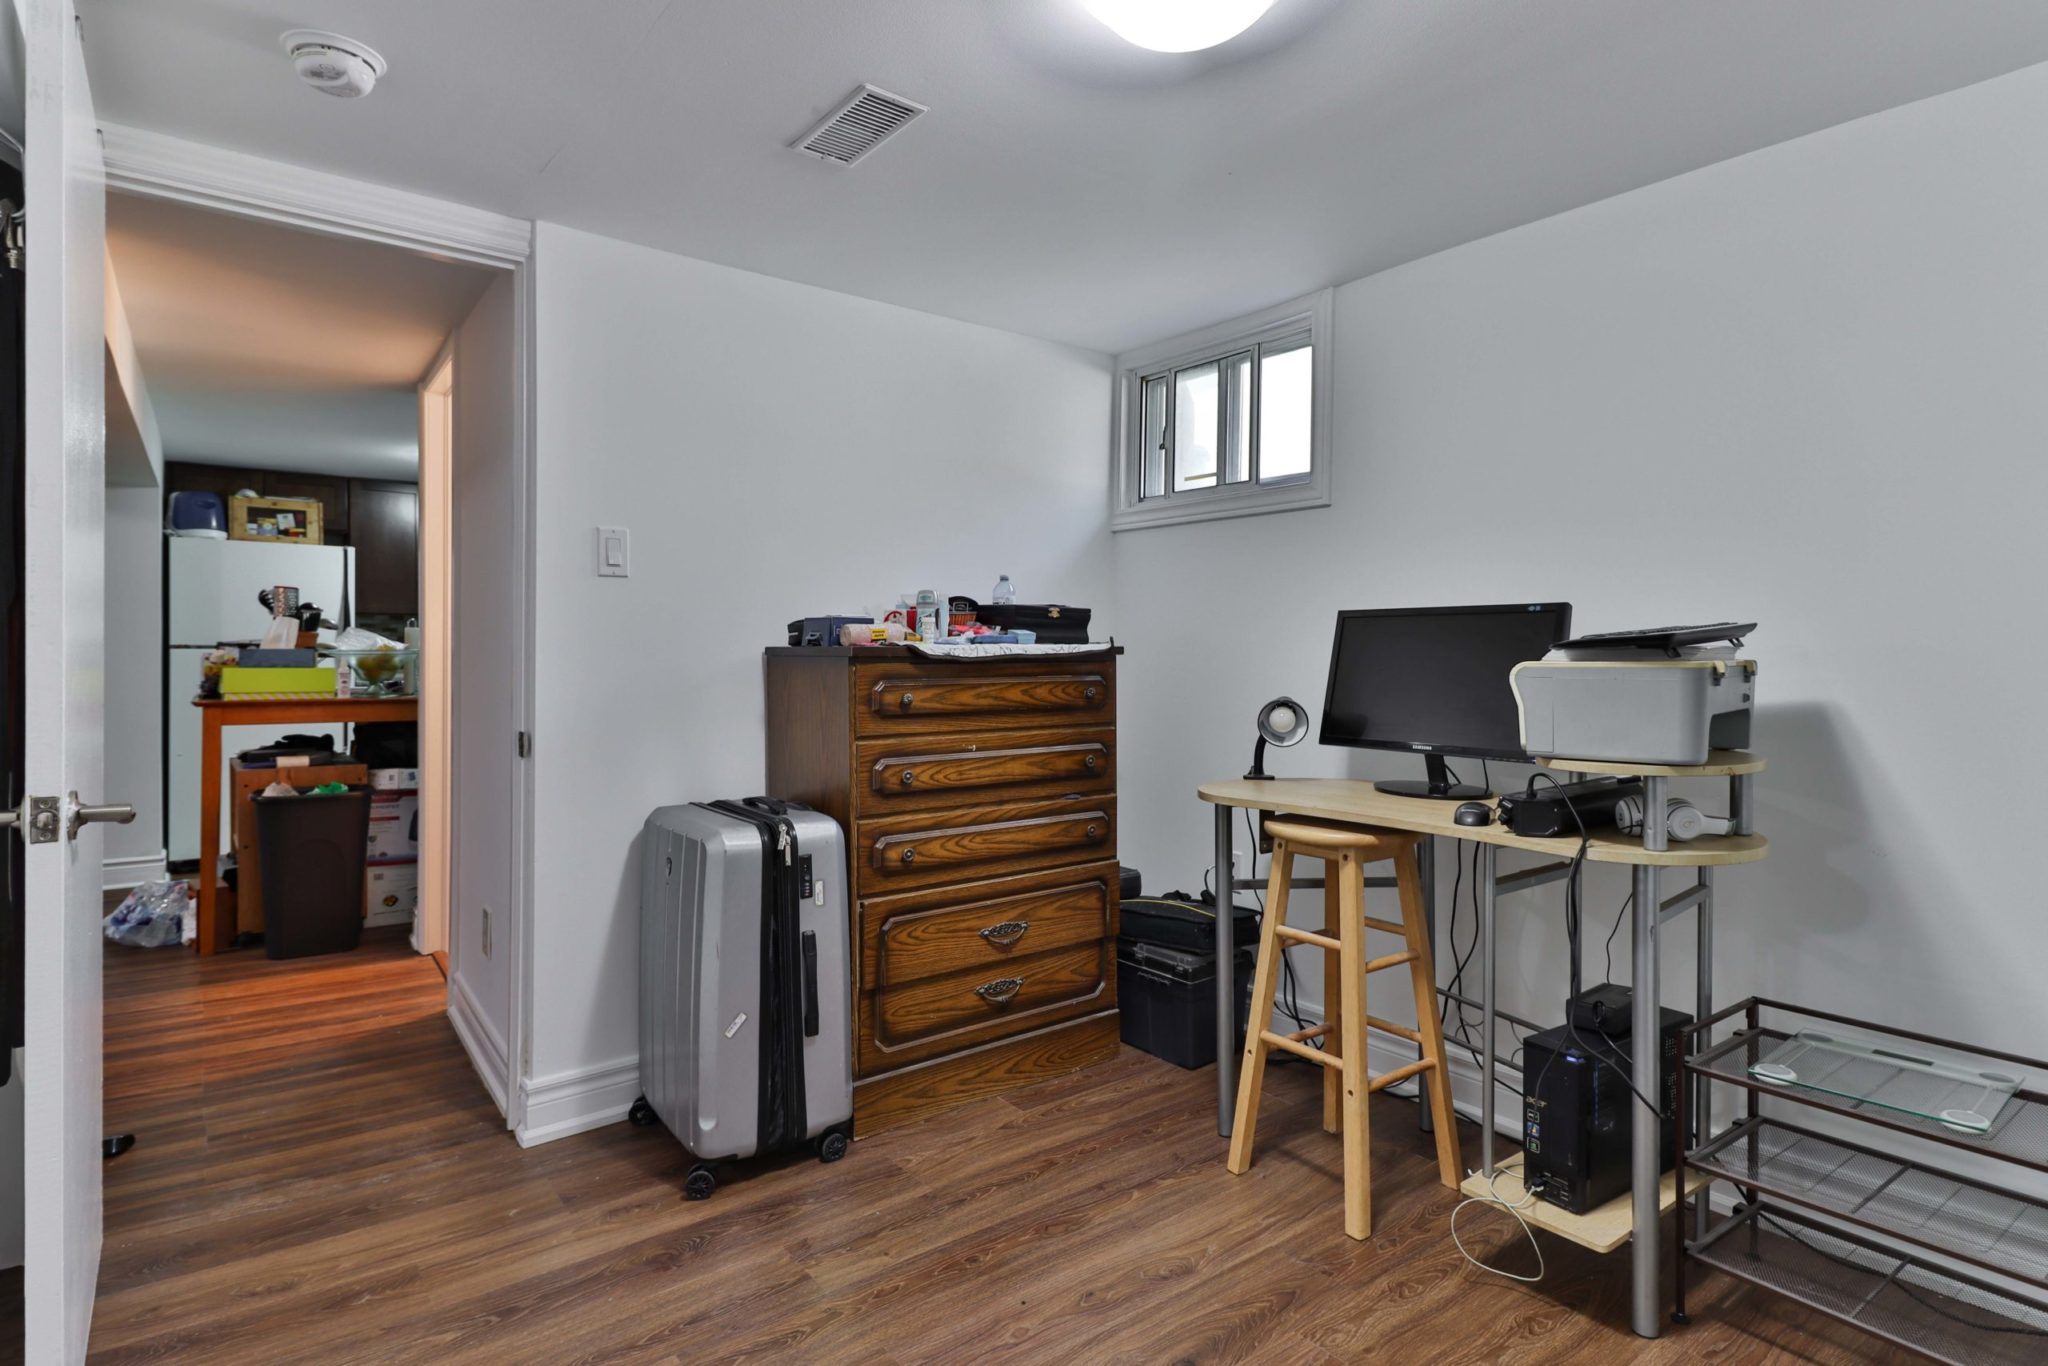 Basement office with computer, desk, large dresser, luggage and laminate floors.